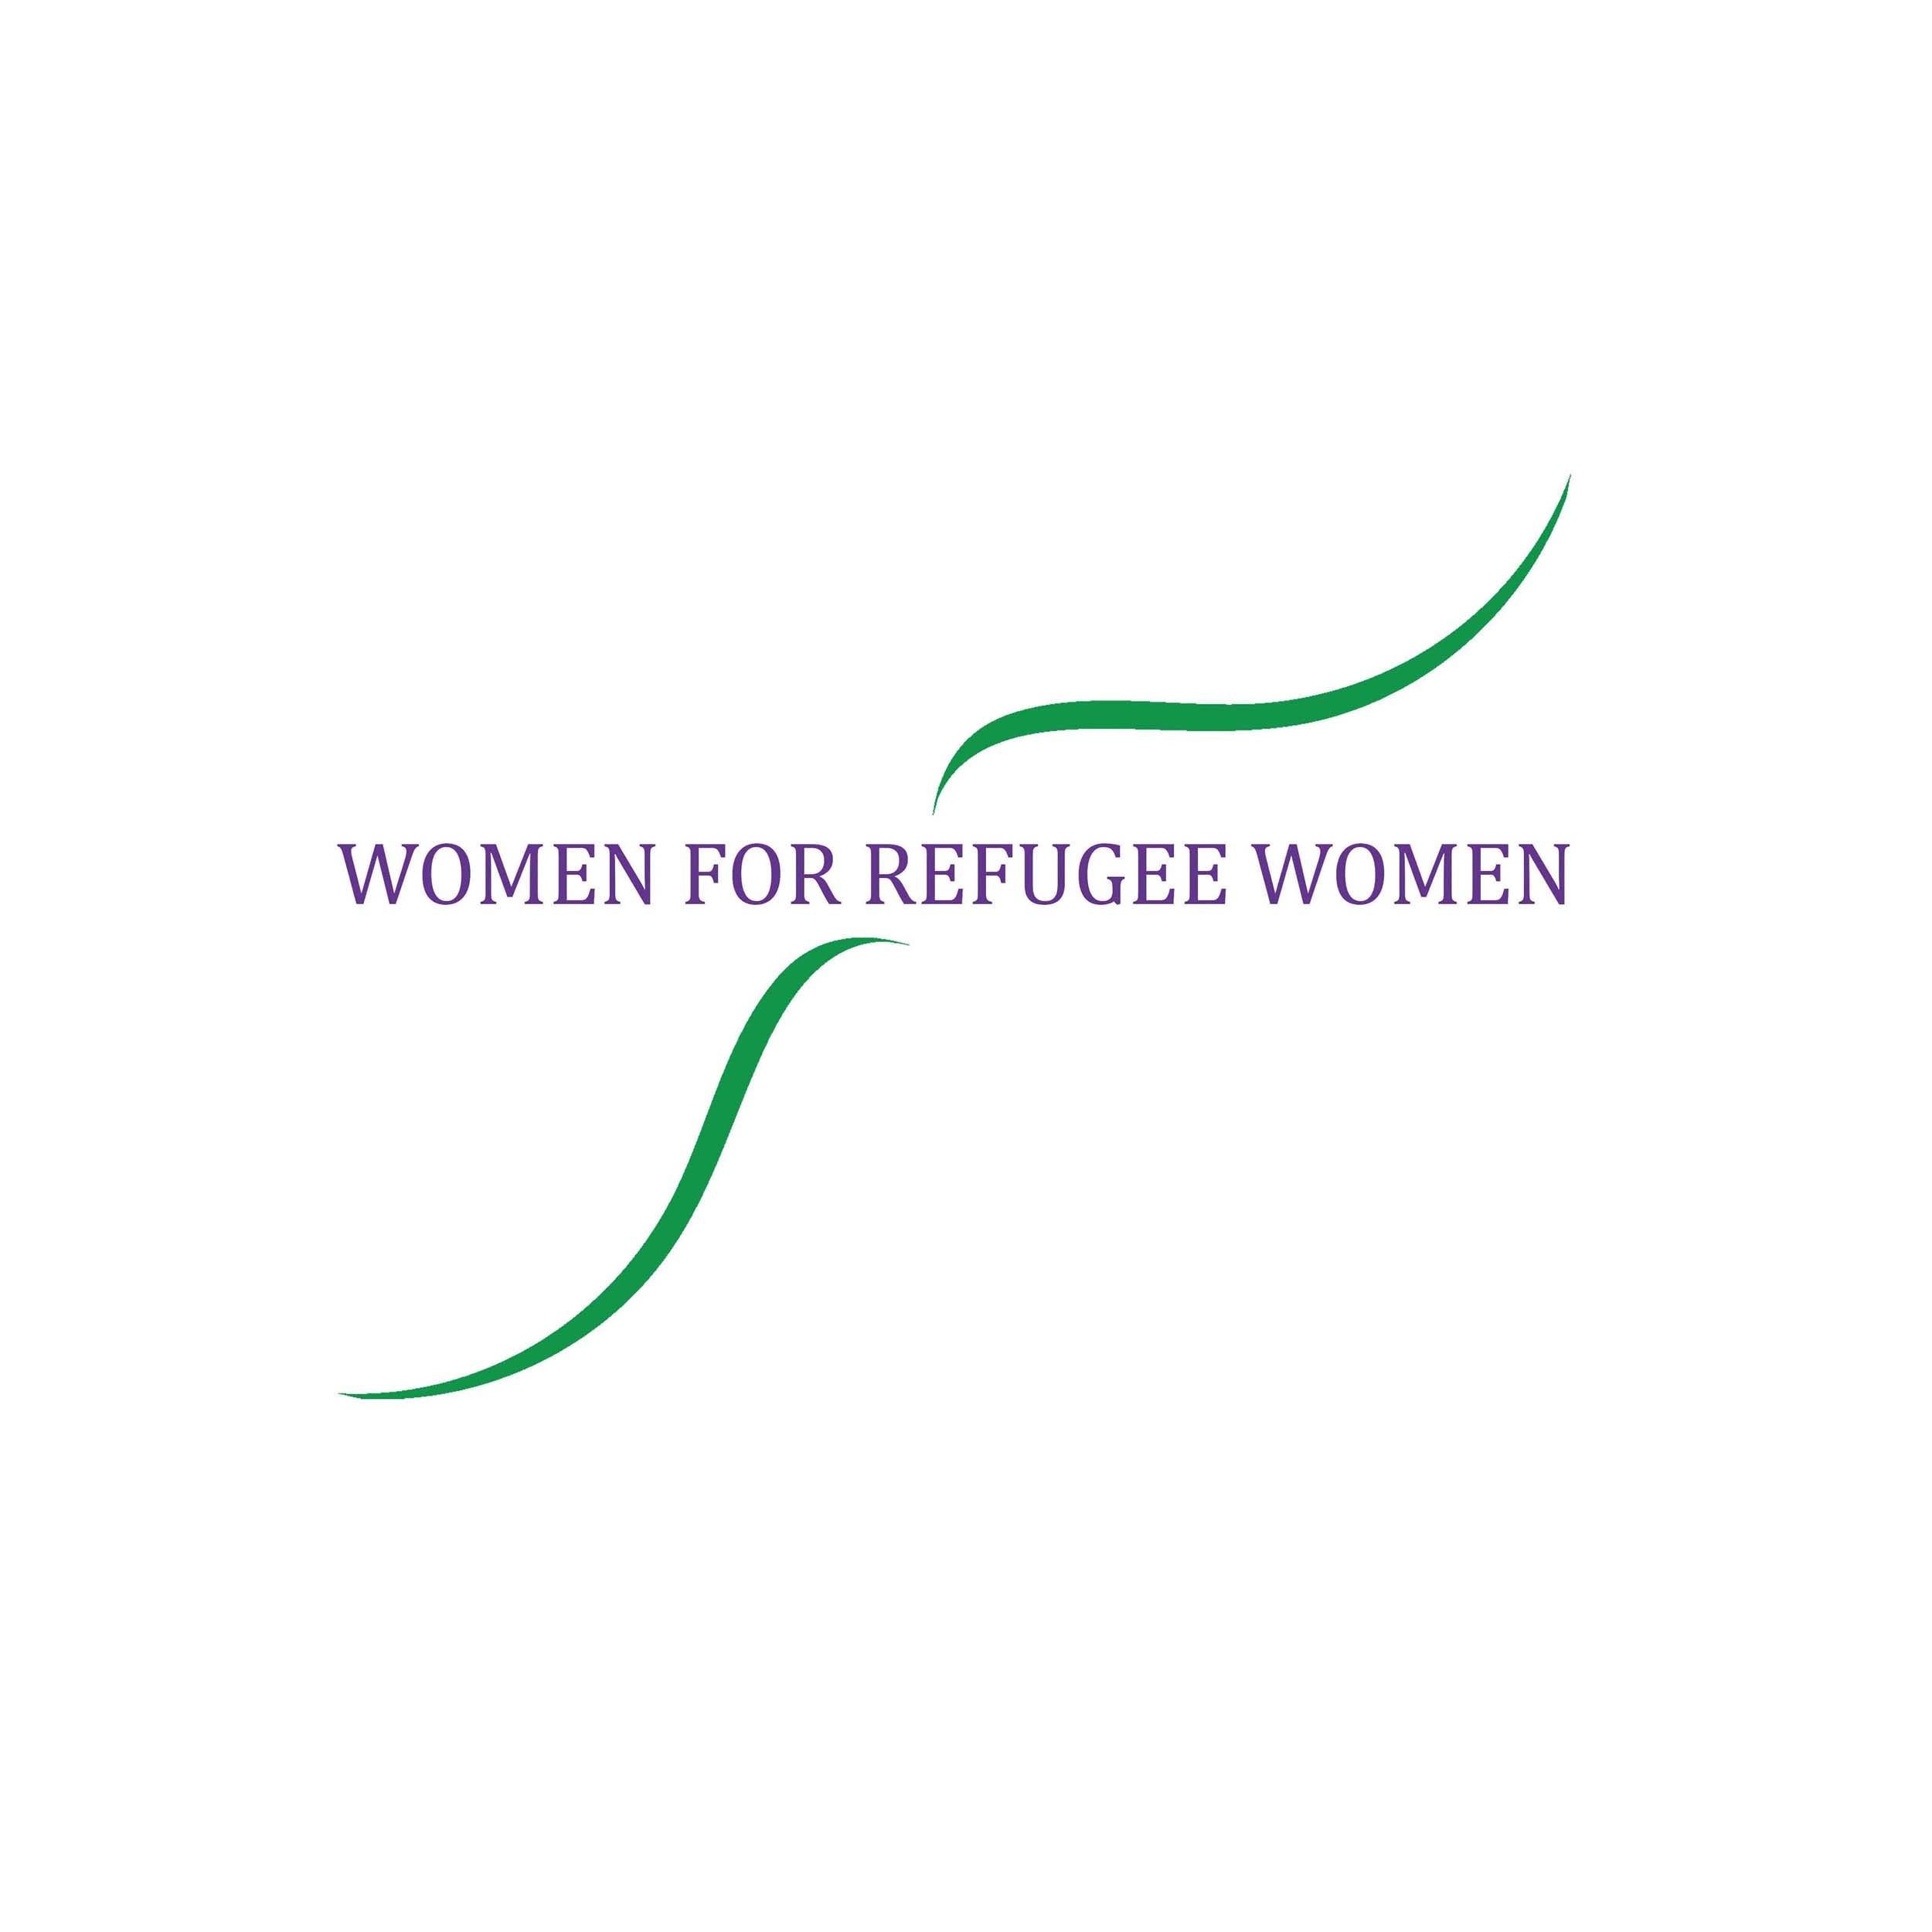 Women for Refugee Women charity logo. £2 from the sale of each Vote necklace will be donated to them. 